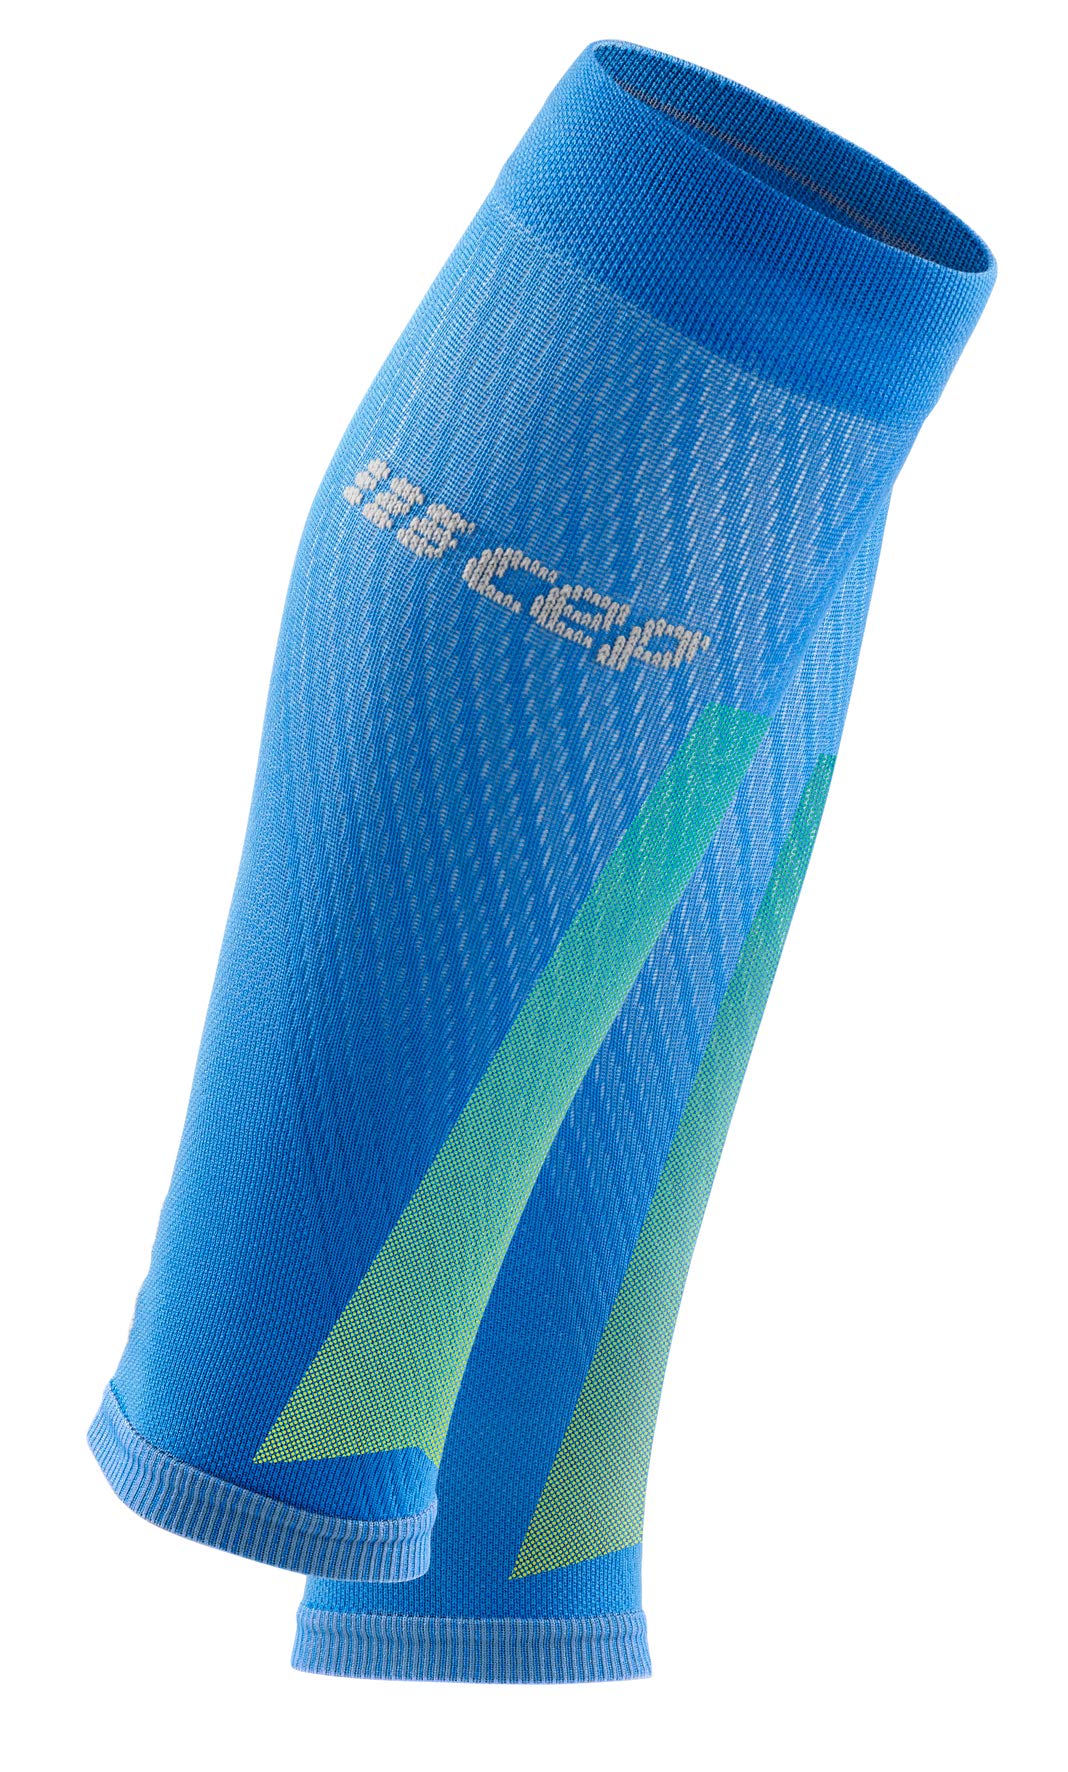 CEP THE RUN COMPRESSION REFELCTIVE CALF SLEEVES - MADE IN GERMANY